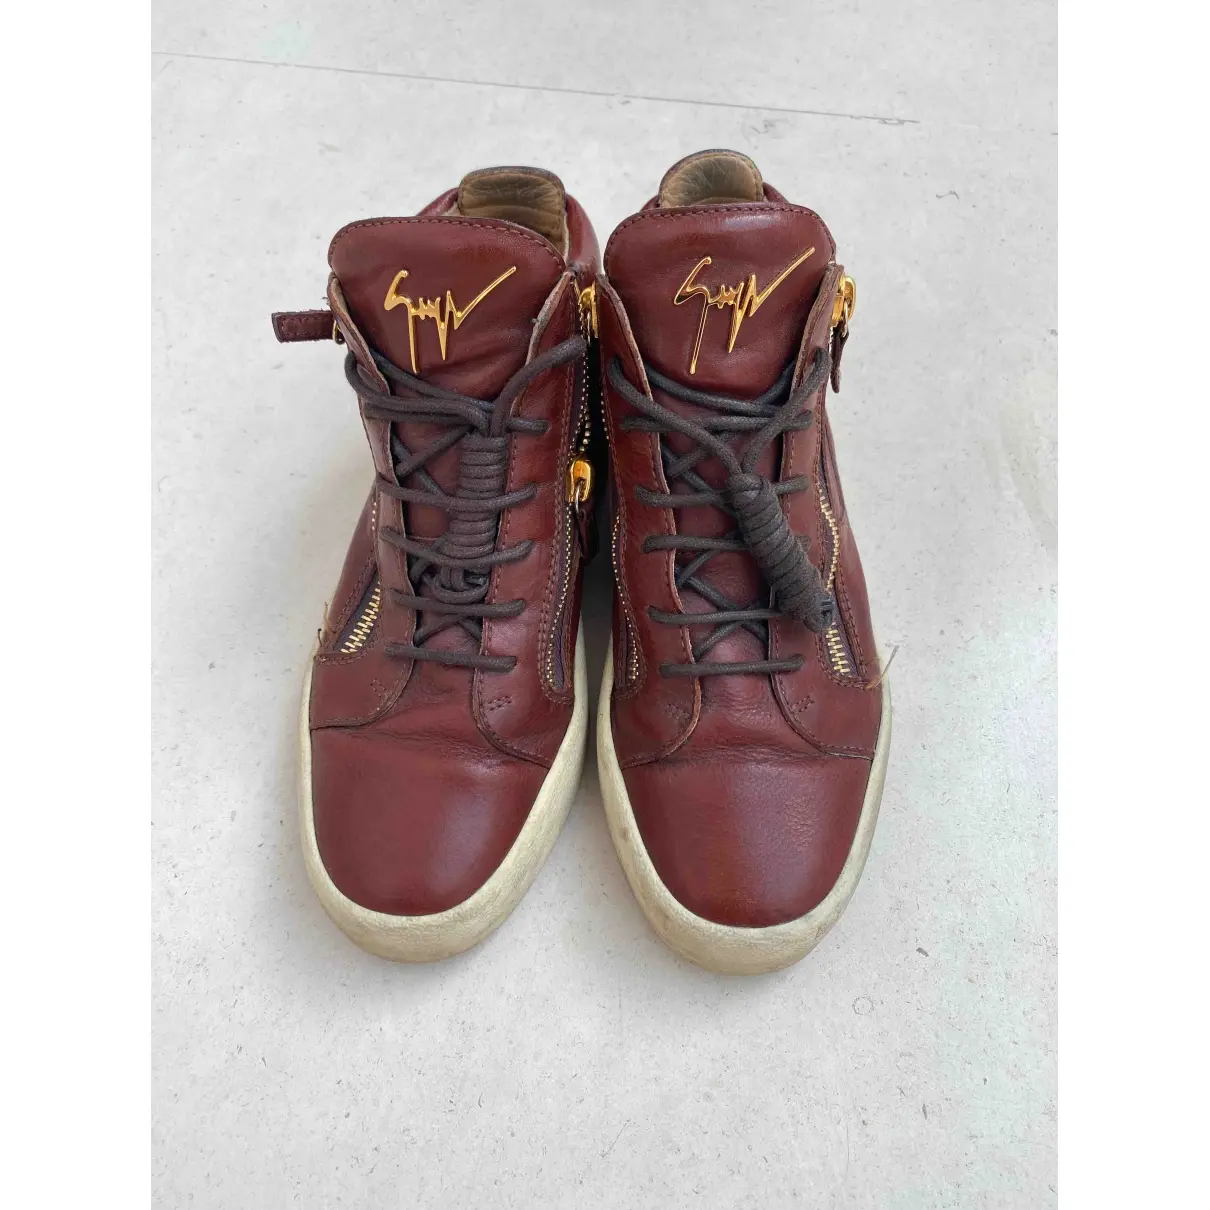 Giuseppe Zanotti Leather high trainers for sale